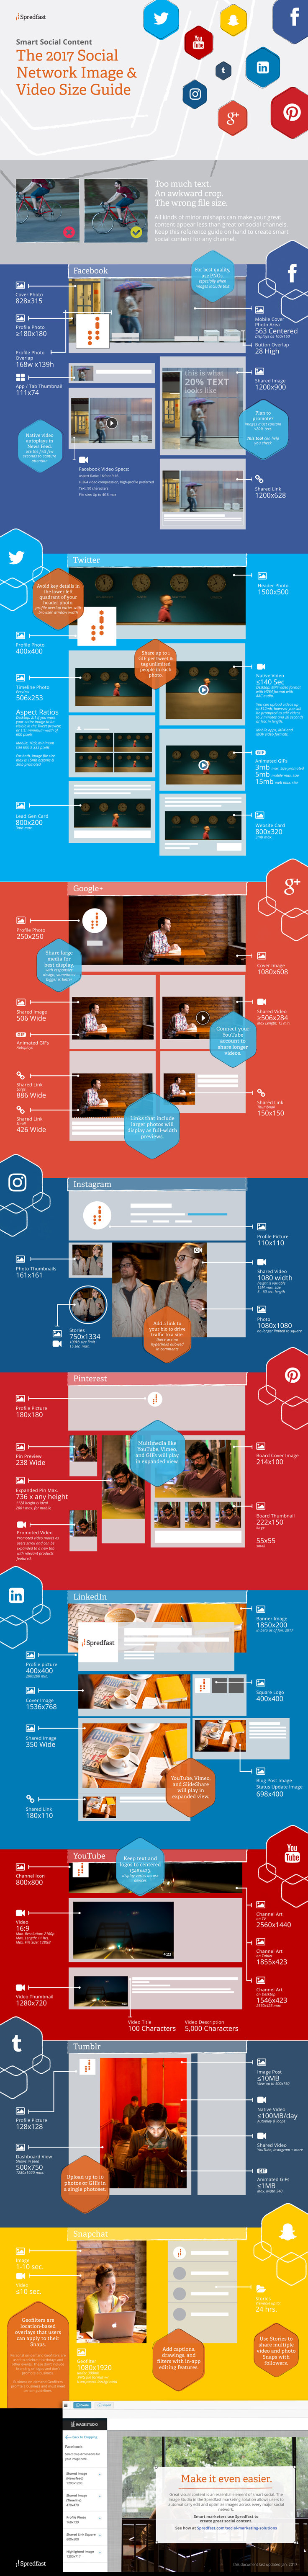 The 2017 Social Network Image and Video Size Guide